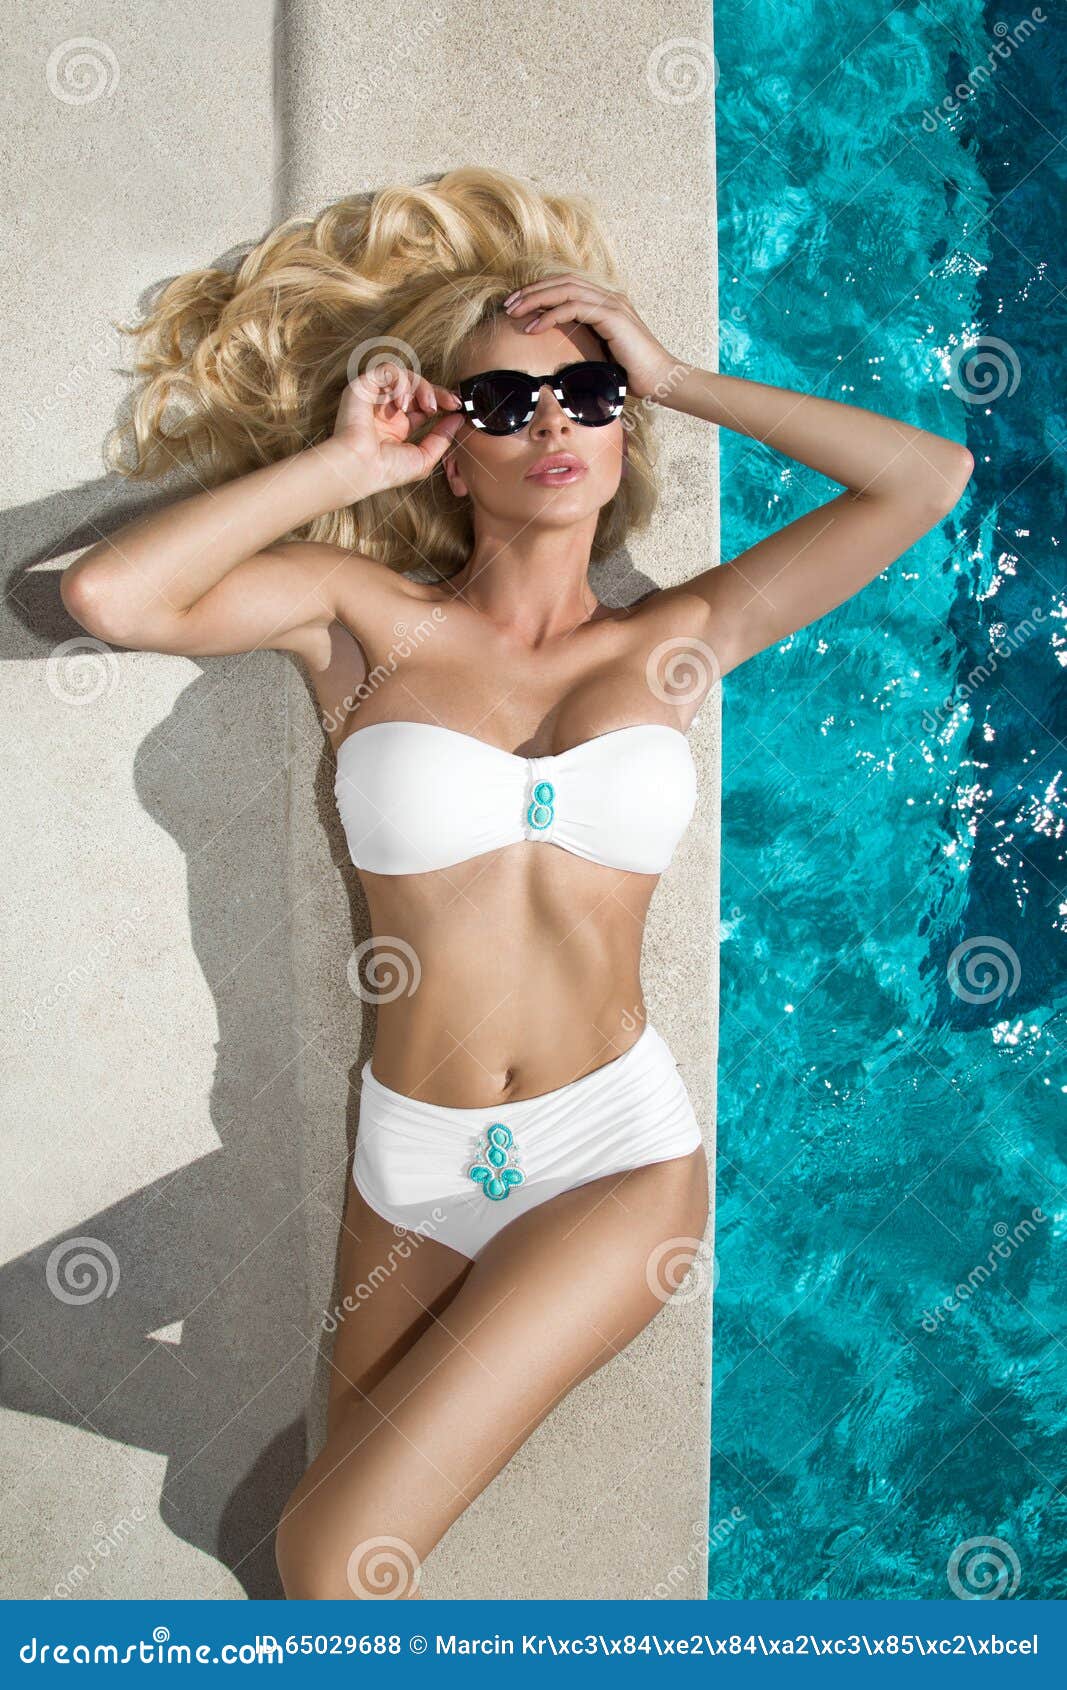 sexy woman young girl model sunglasses elegant white black sexy swimsuit beautiful blond hair crystals around 65029688